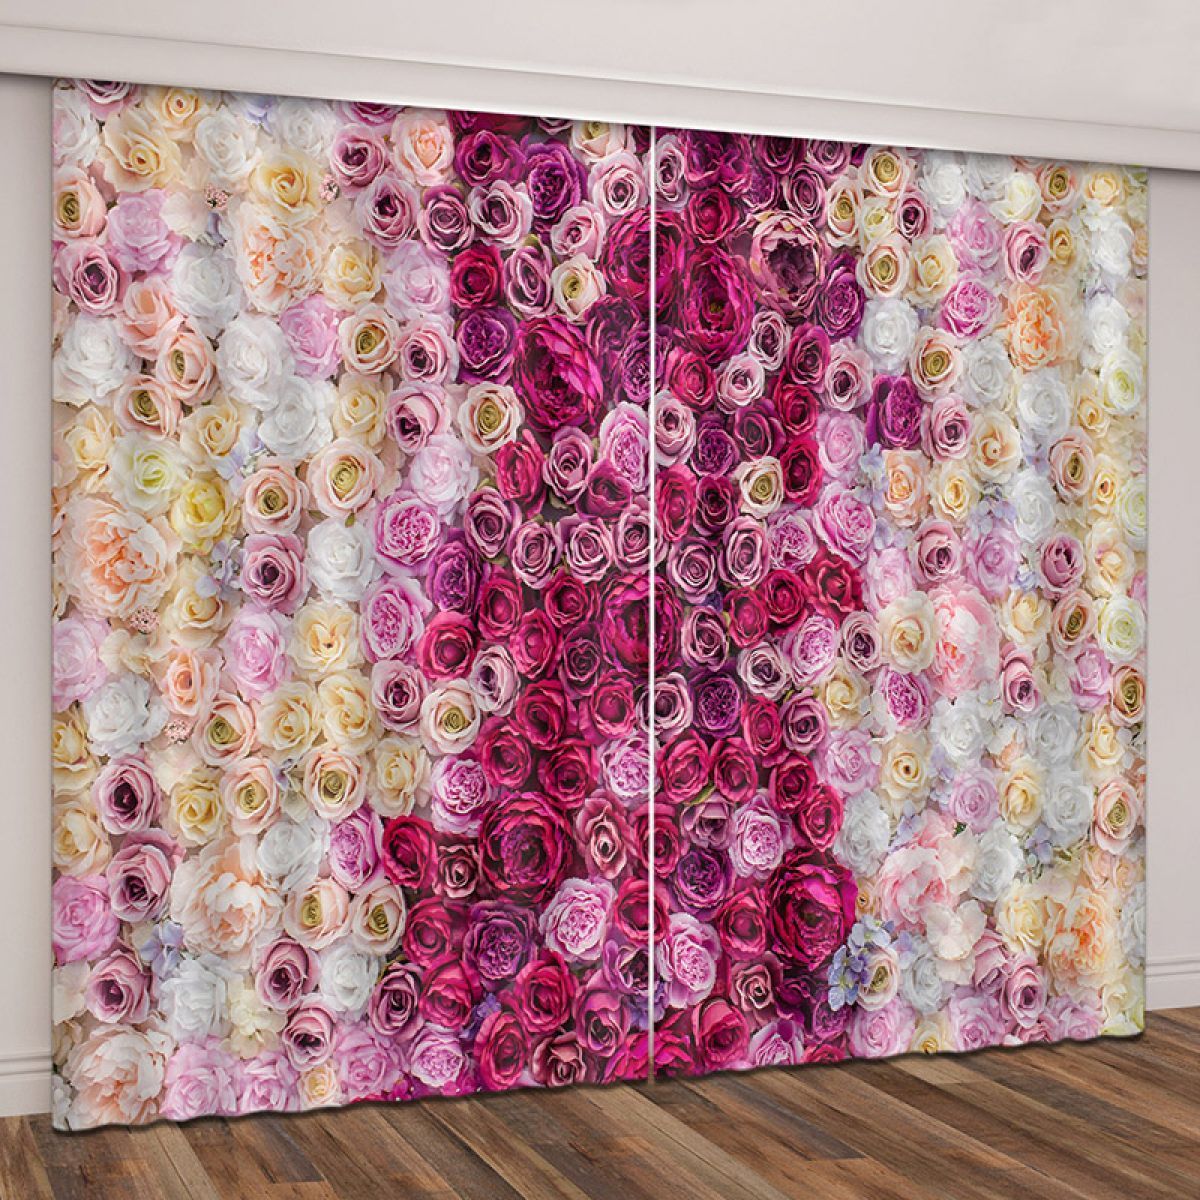 Colorful Roses Romantic View Printed Window Curtain Home Decor